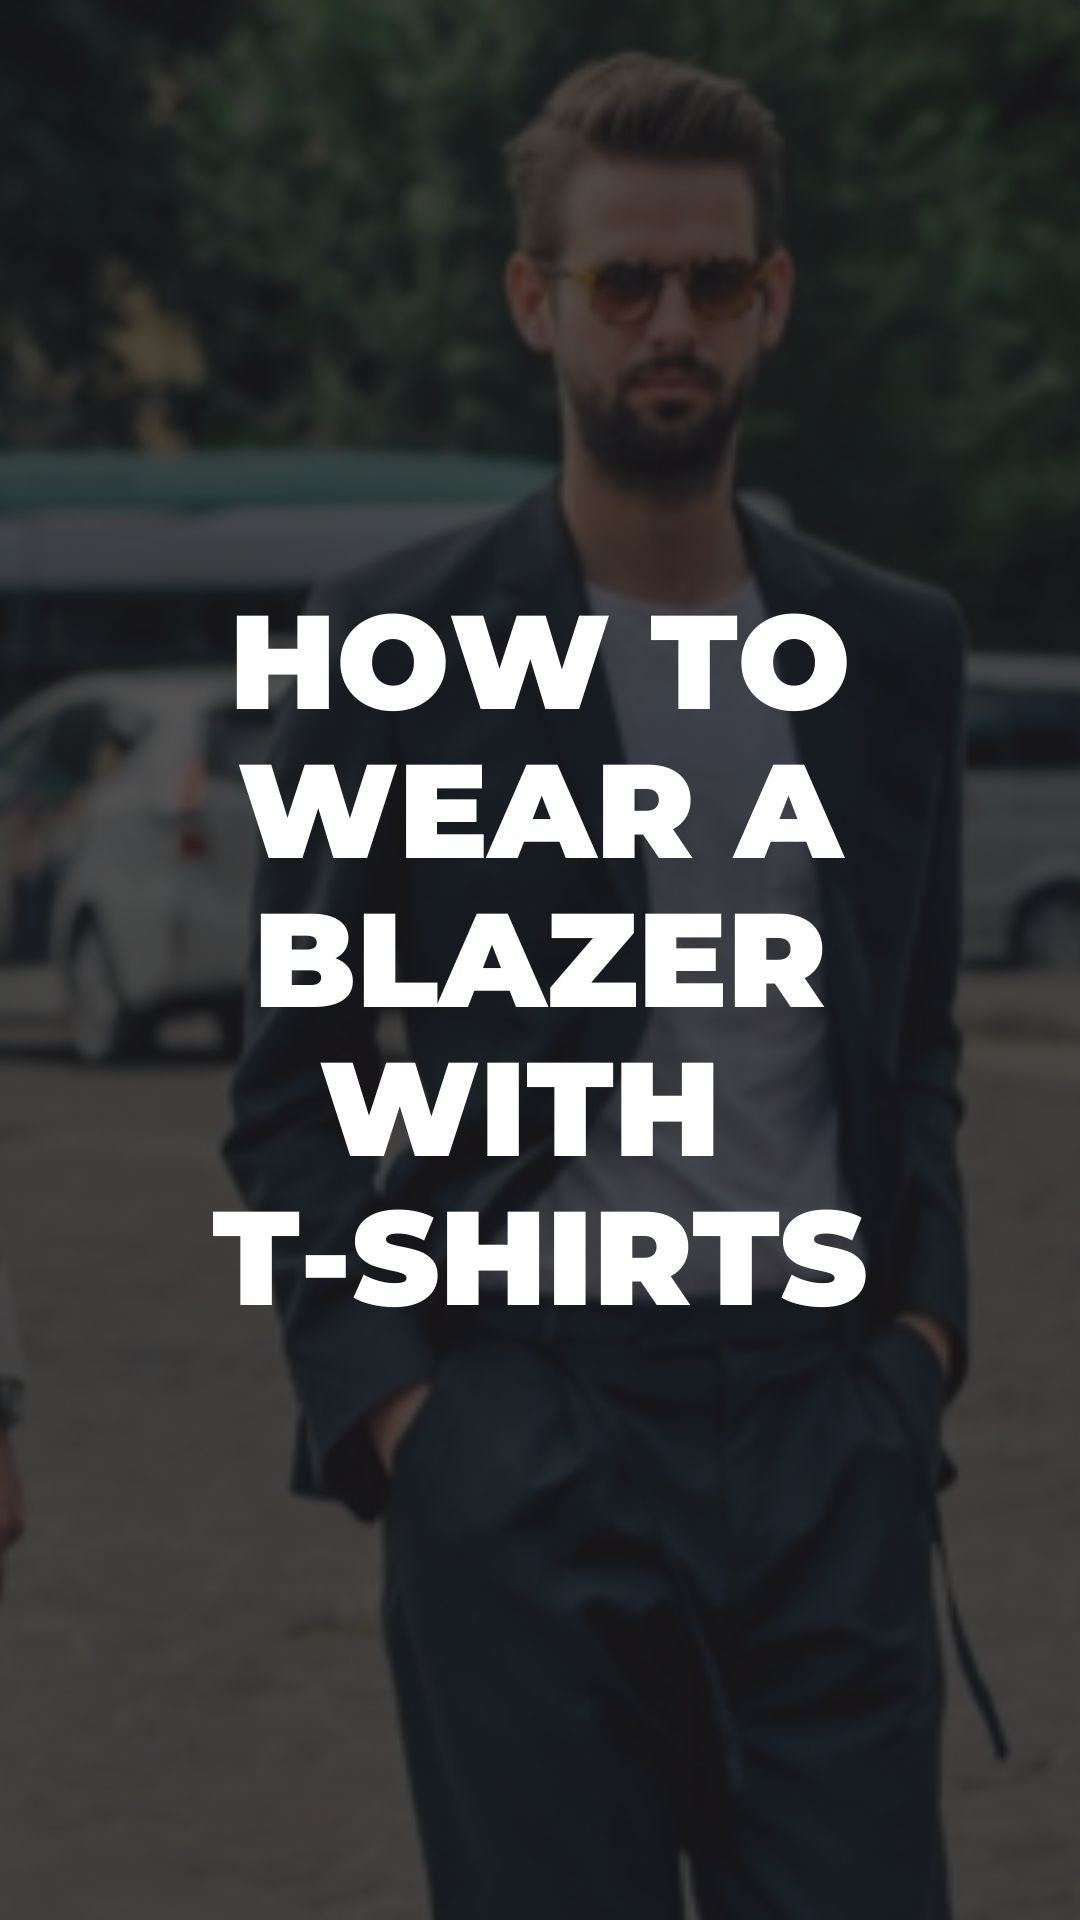 How To Wear A Casual Blazer With T-shirts